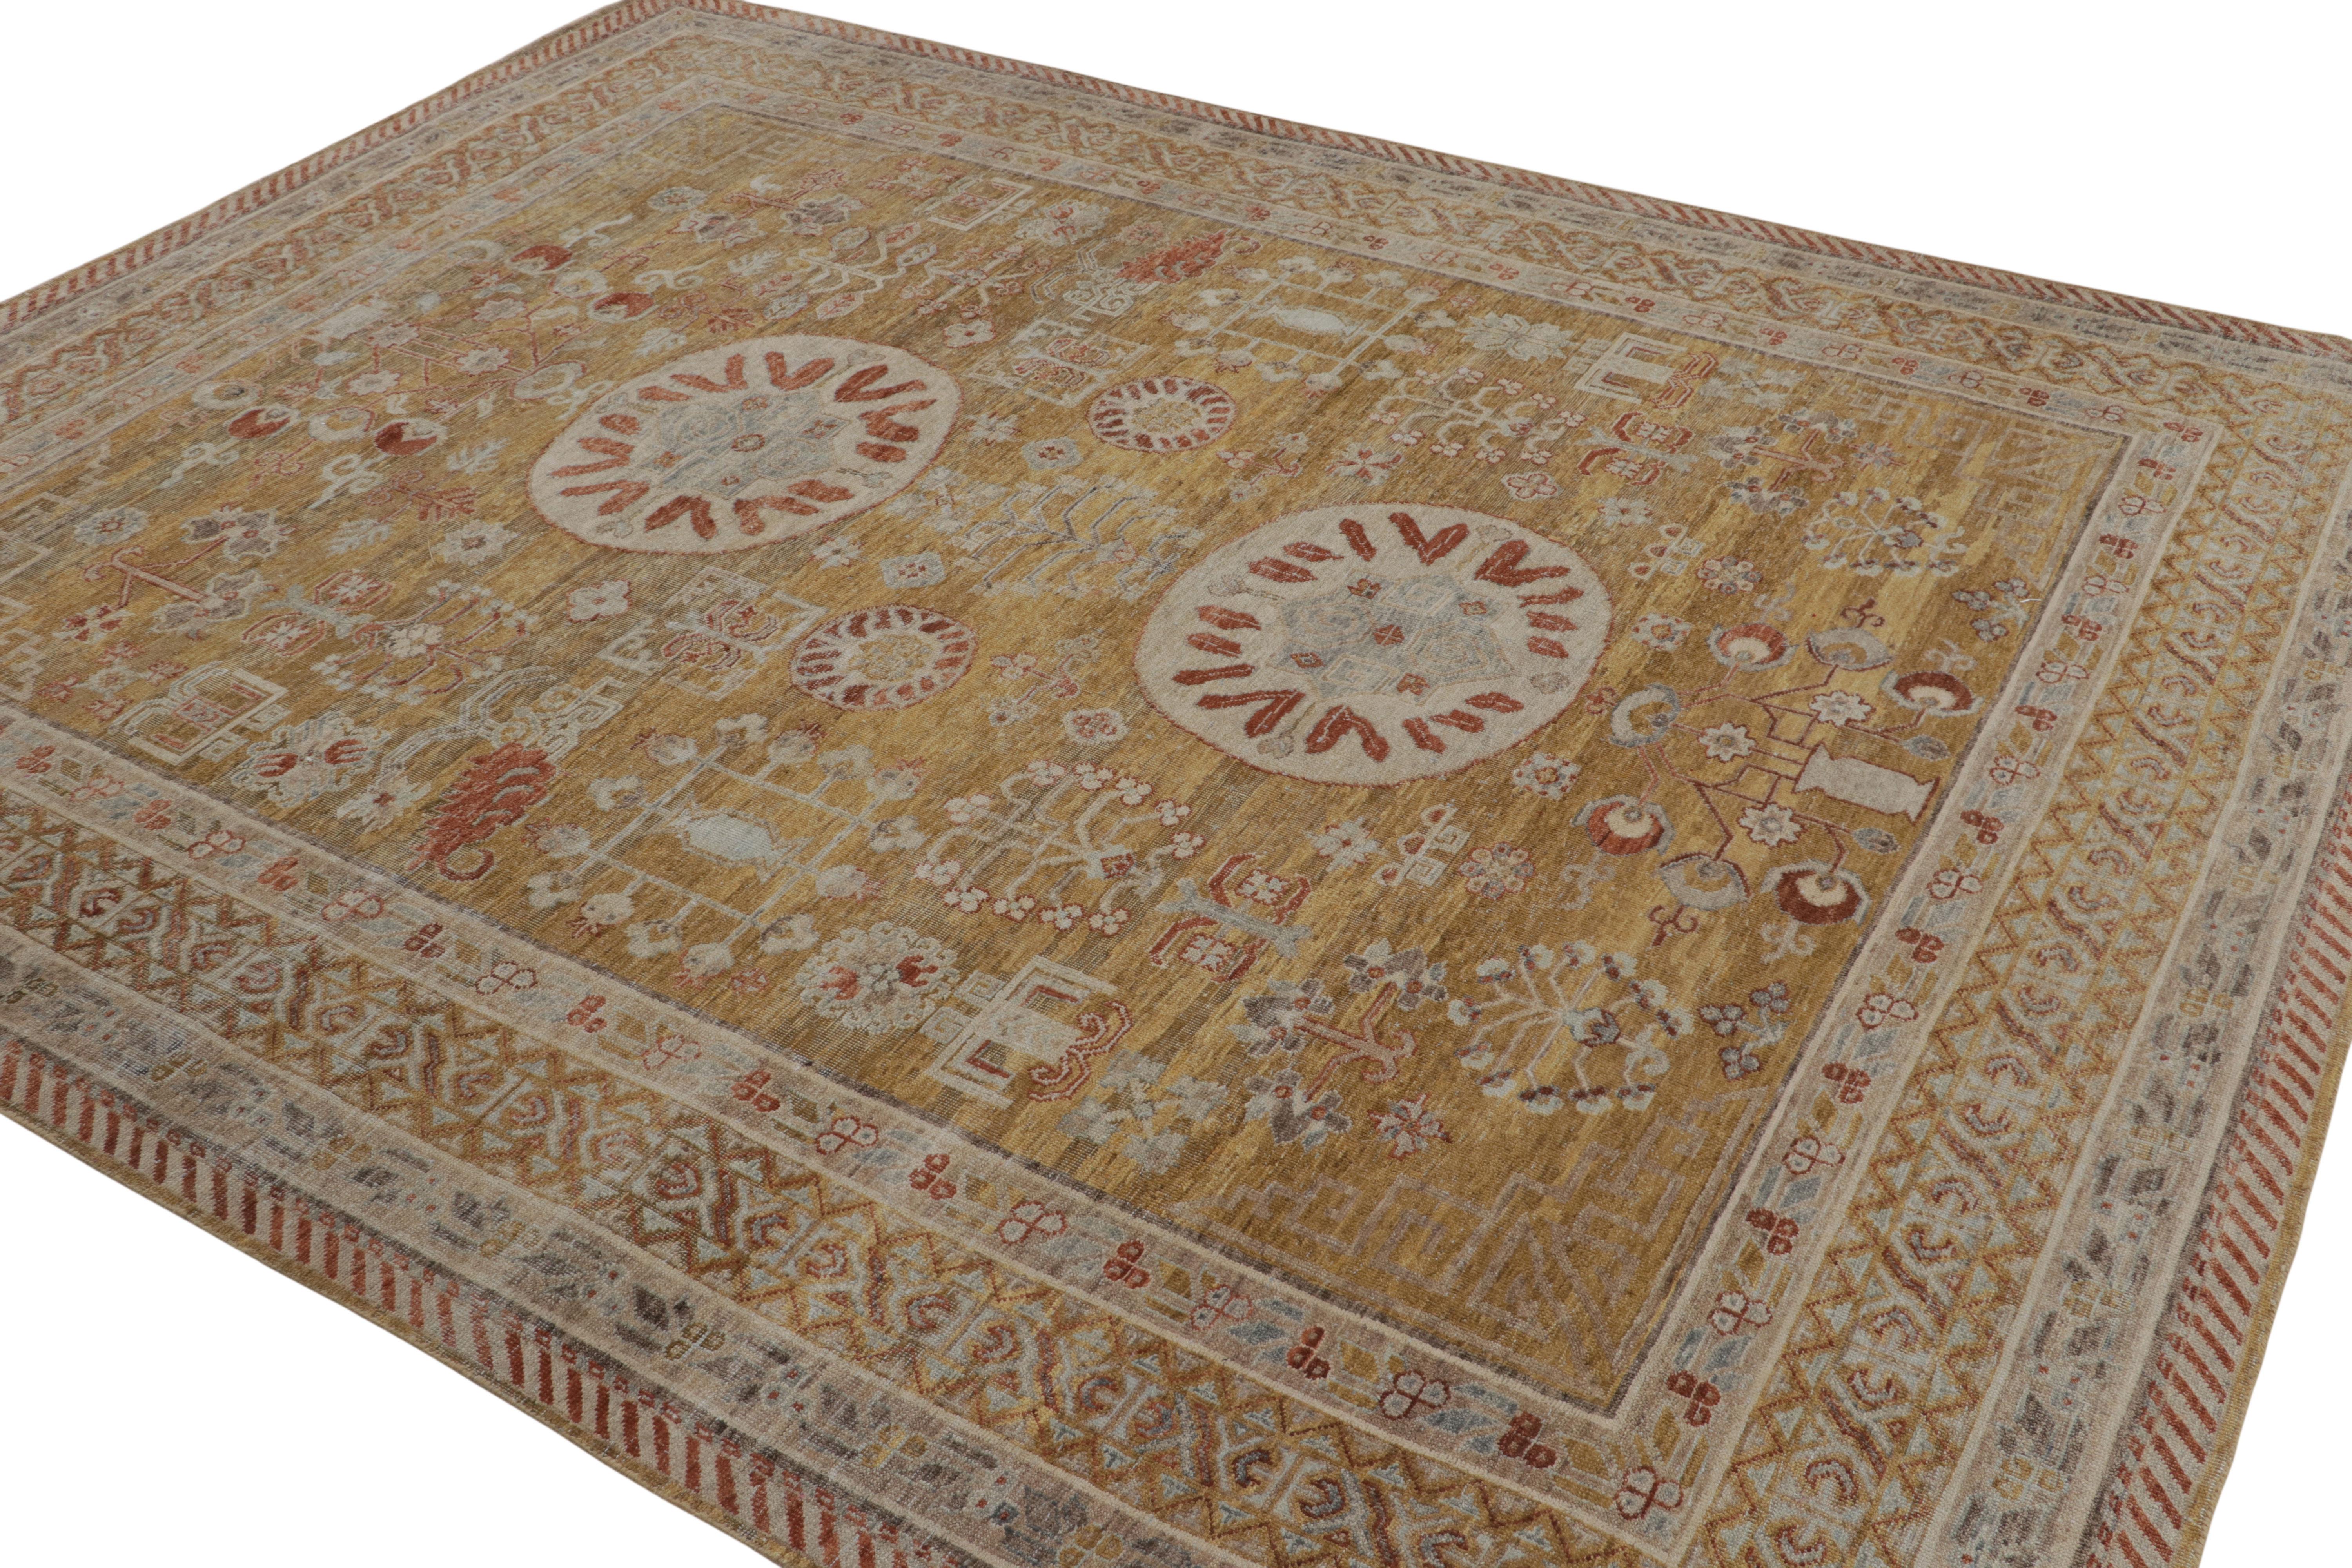 Hand-Knotted Rug & Kilim’s Khotan Rug in Gold and Red with Geometric Patterns For Sale